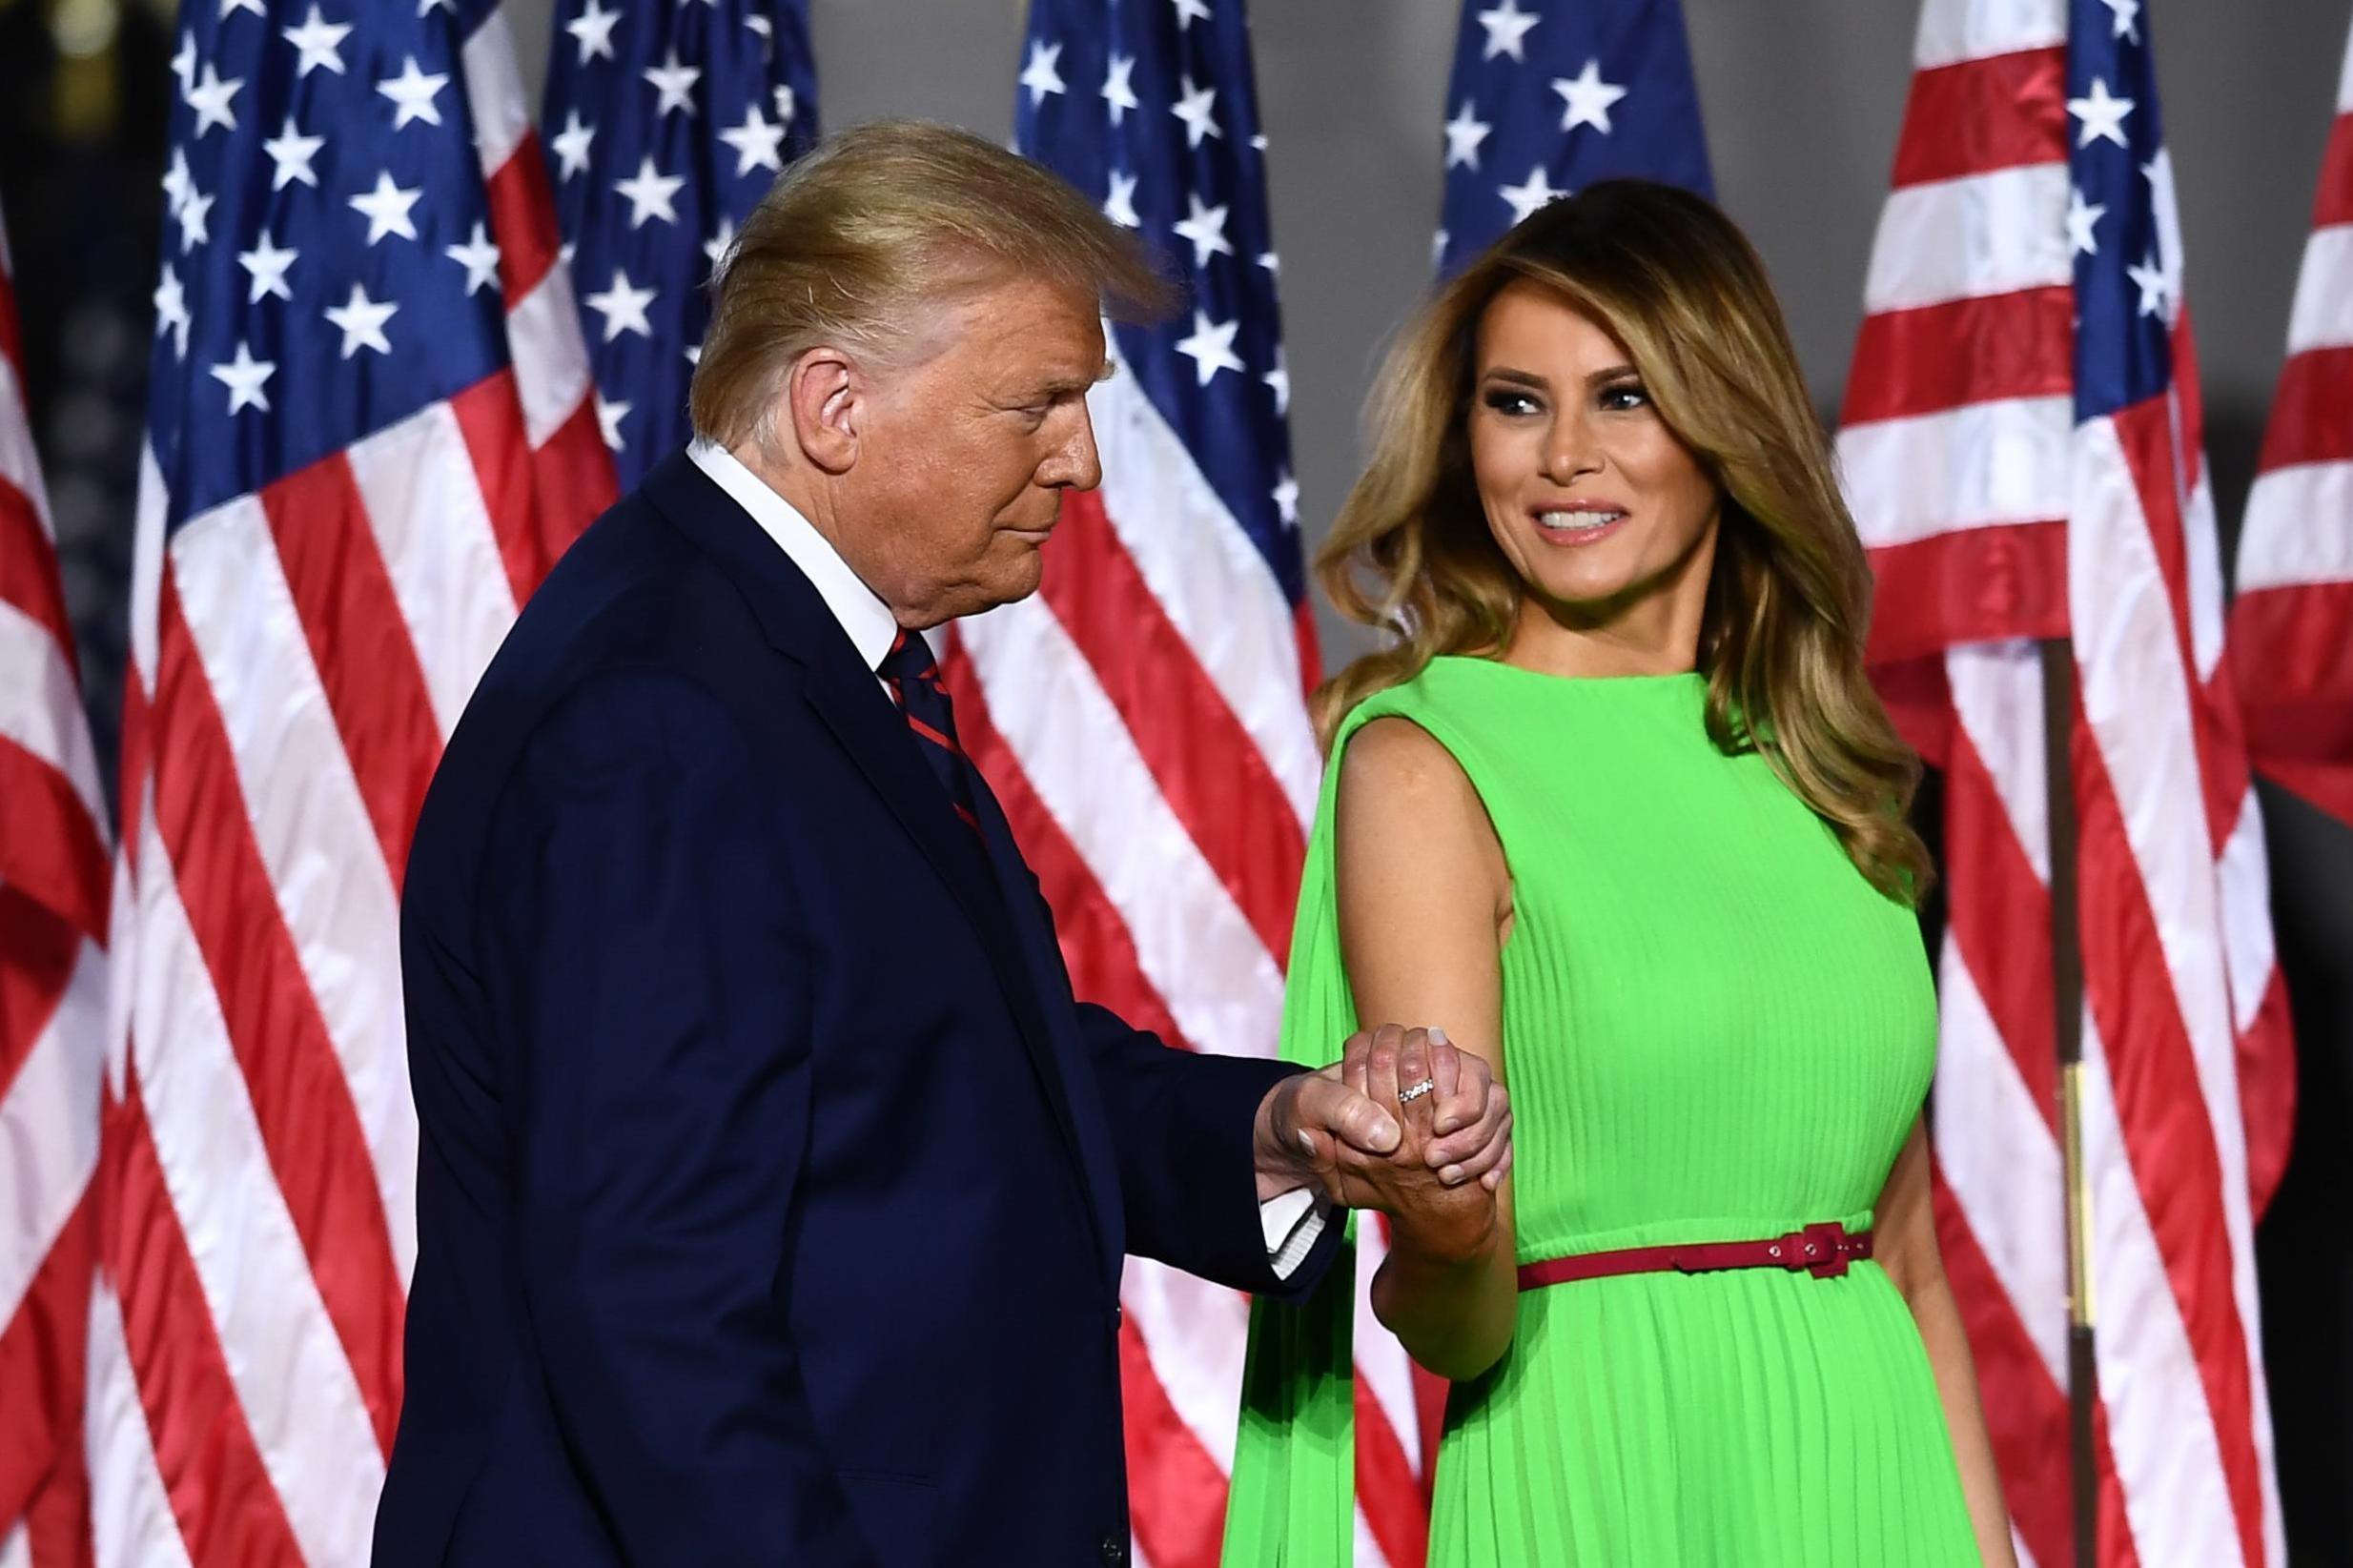 Melania Trump's RNC dress used as green screen: 'There's a good reason public figures should avoid green clothing'